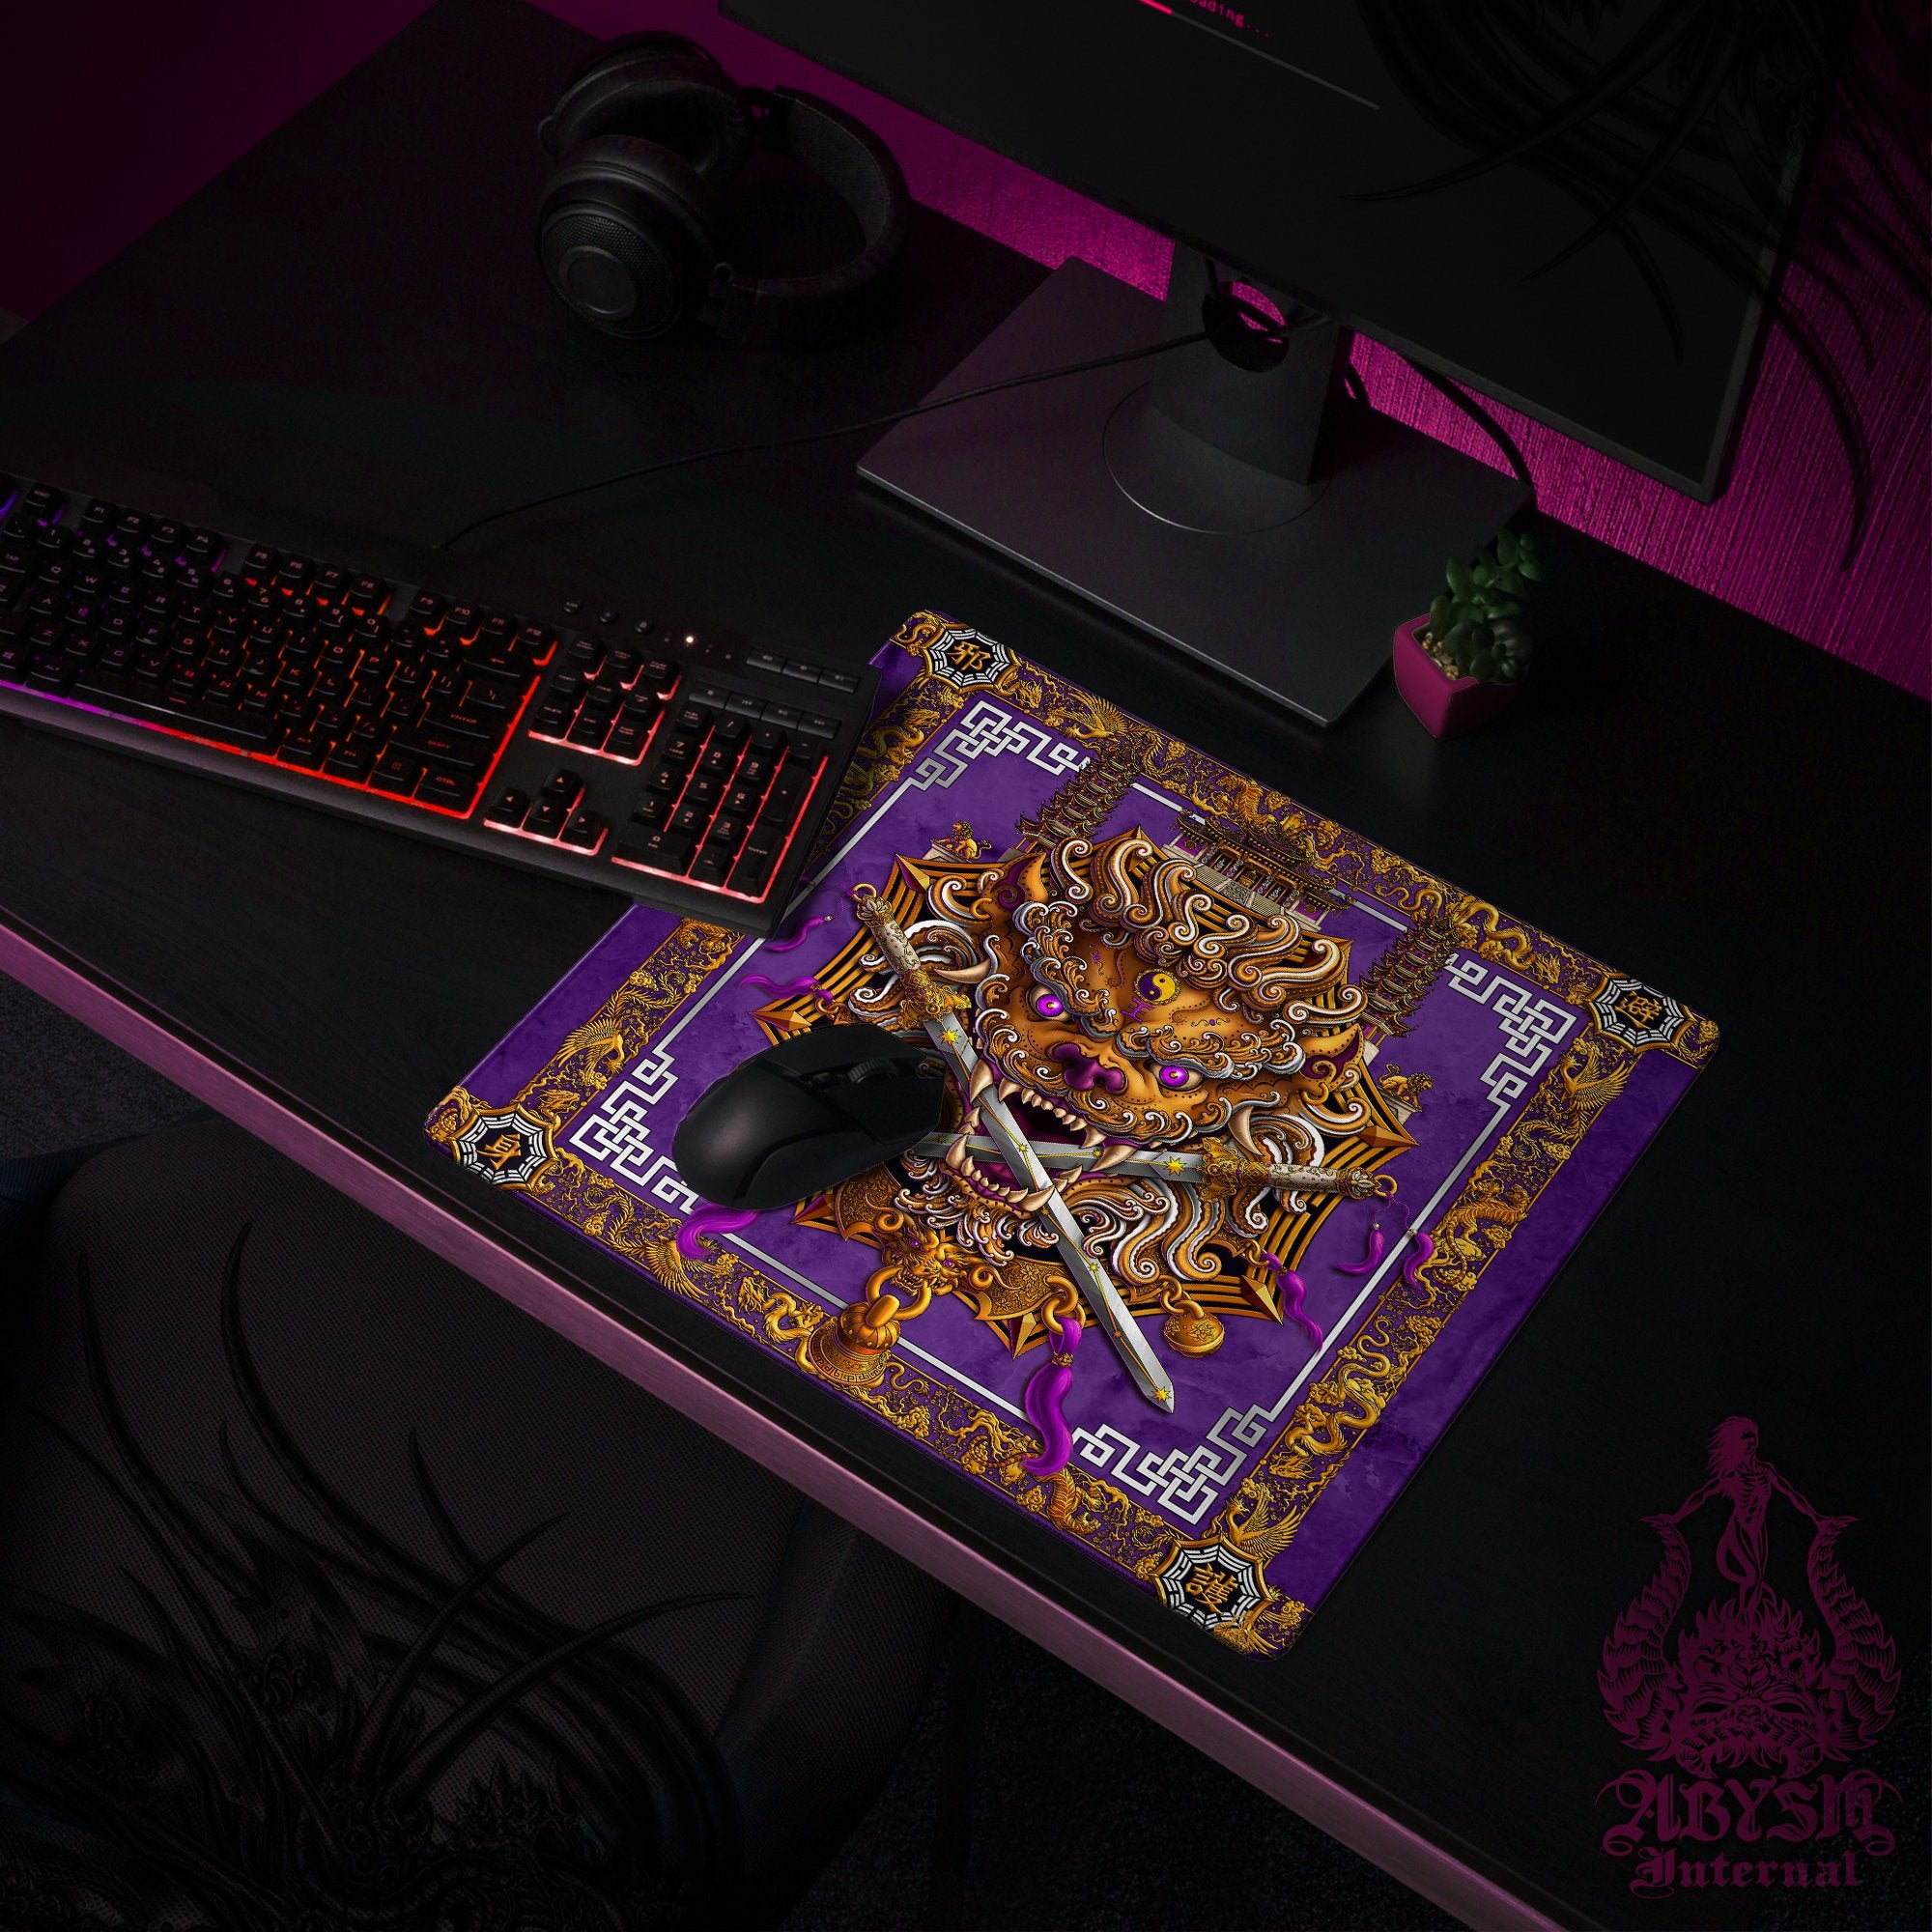 Chinese Lion Mouse Pad, Taiwan Gaming Desk Mat, Purple White Gold Workpad, Asian Table Protector Cover, Fantasy Art Print - Abysm Internal